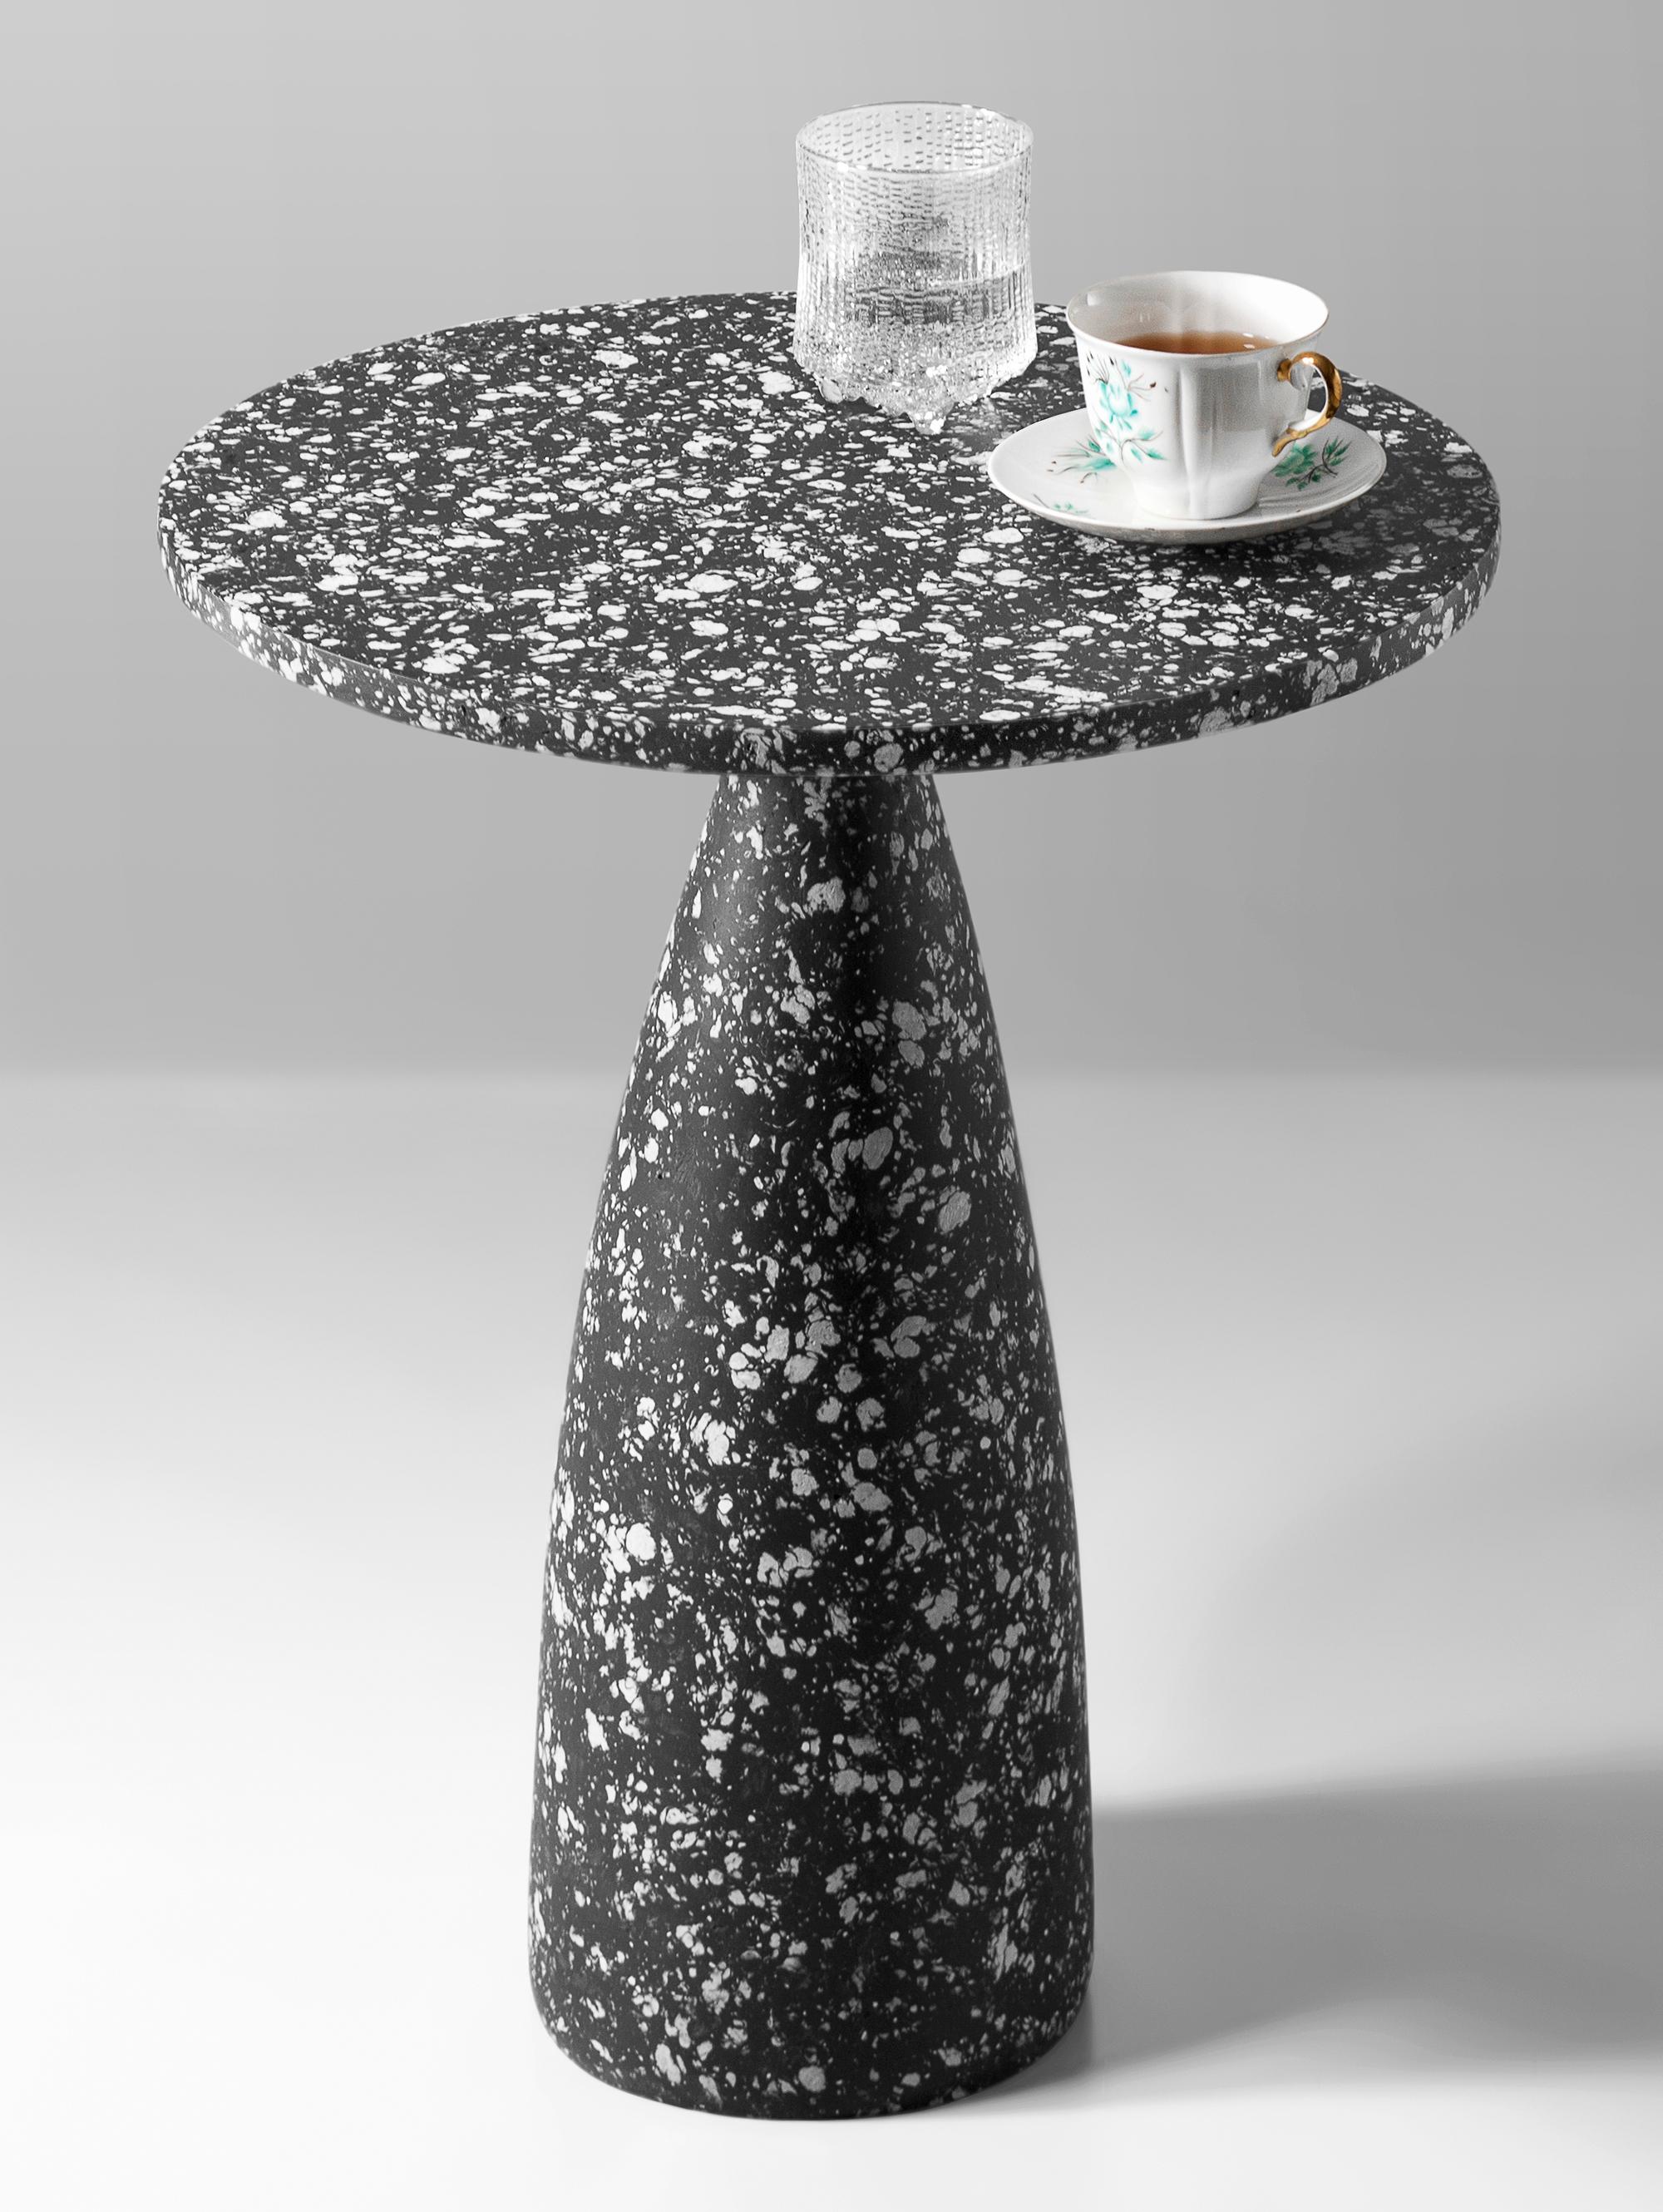 Black Mottled Side Table 40 by Kasanai
Dimensions: D 40 x H 50 cm.
Materials: Cement, recycled paper, glue, paint.
8 kg.

The fusion of sturdiness and elegance, along with the blend of archaism and modernity. More than just a surface for placing